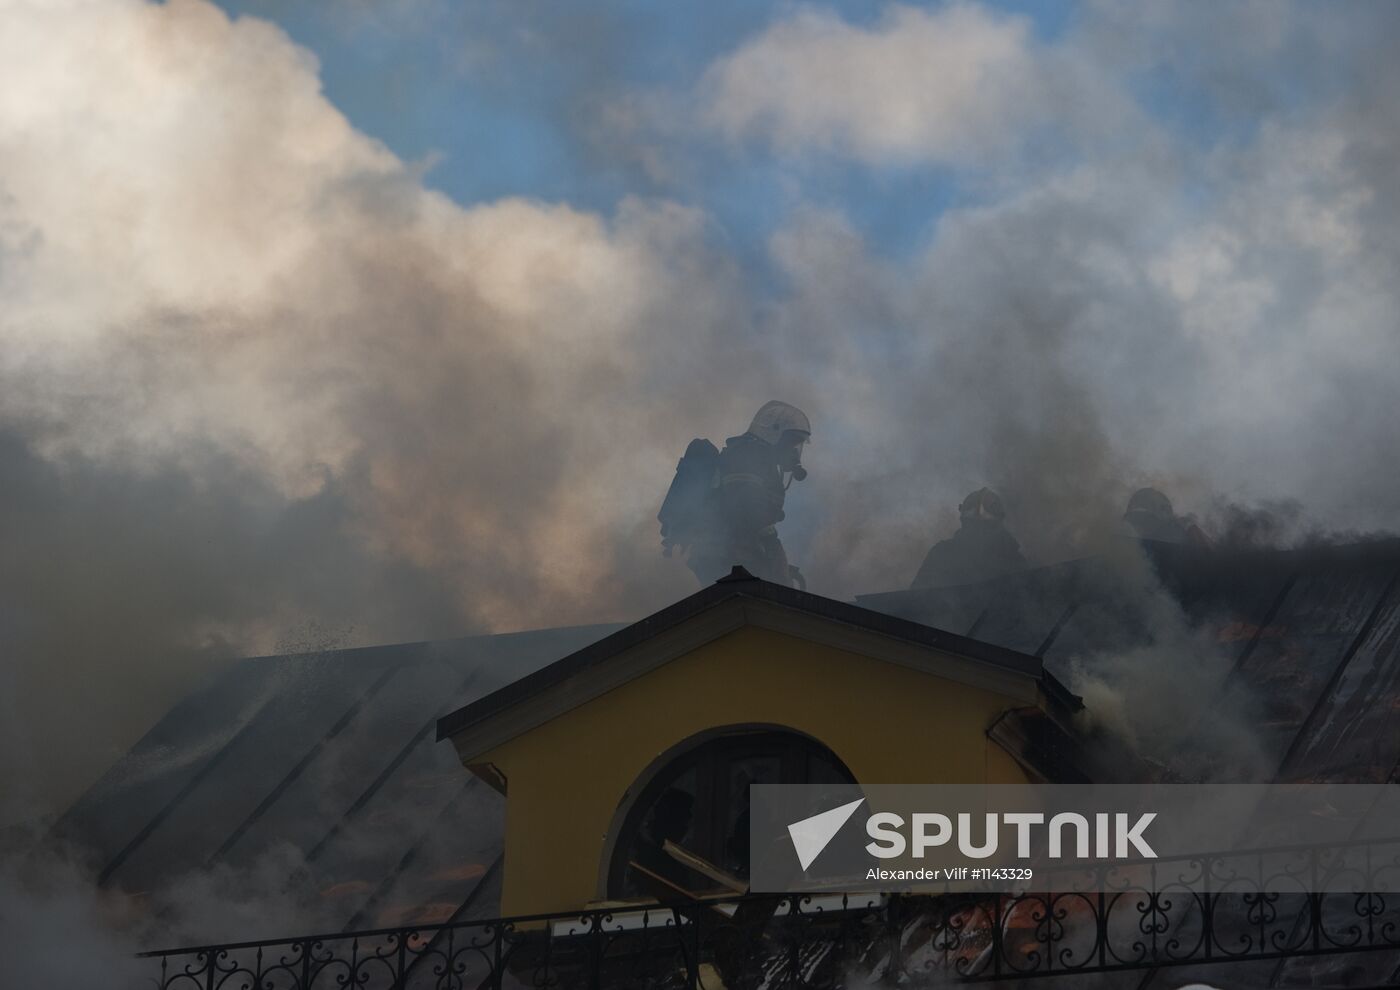 Old building on fire on Stoleshnikov Street in Moscow